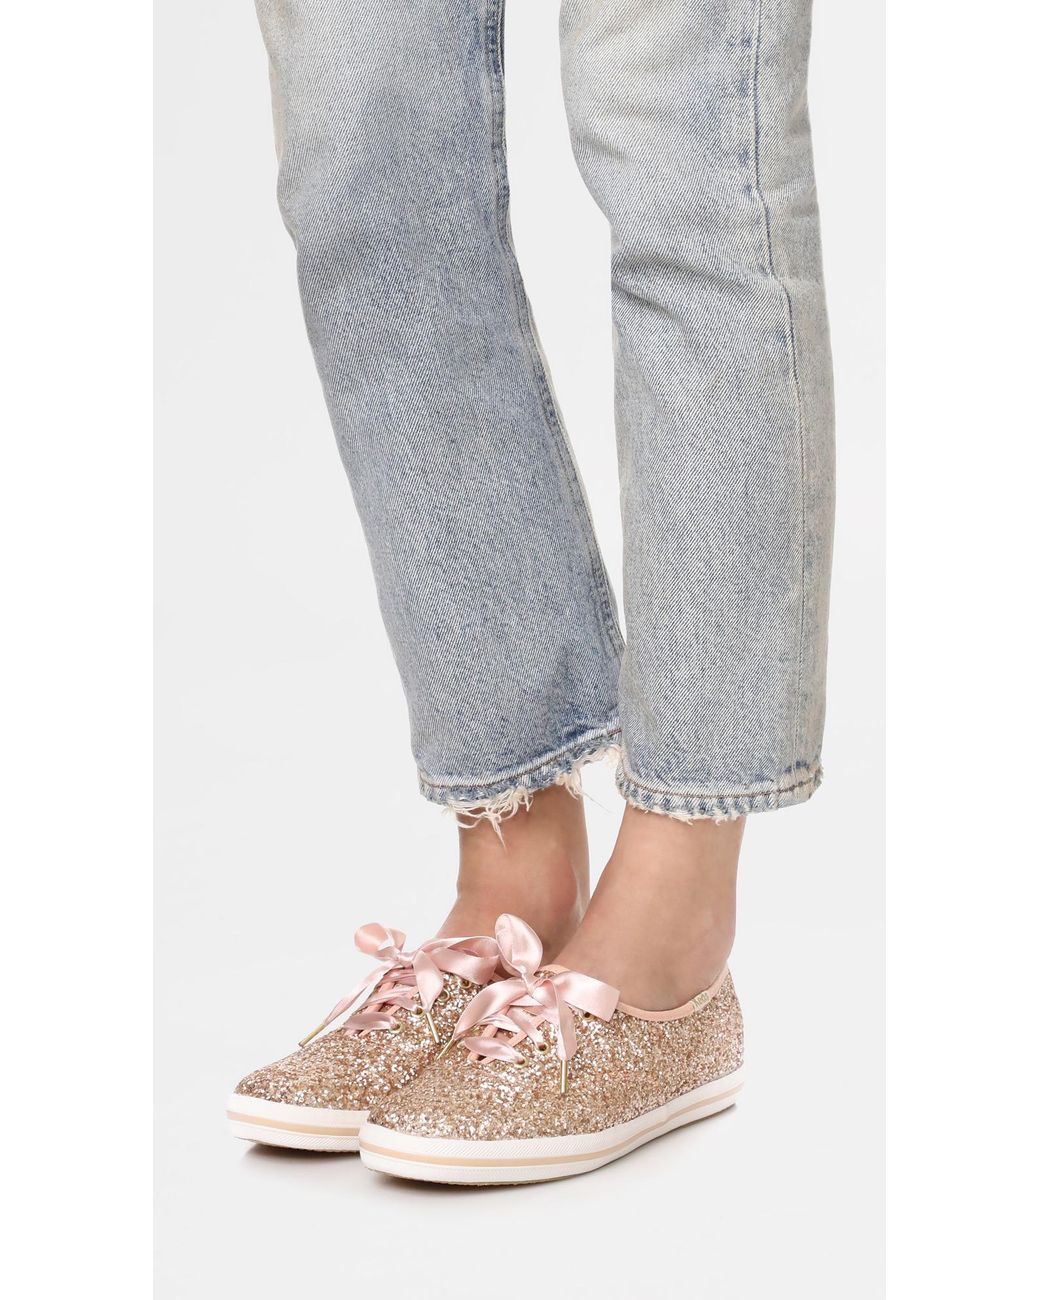 Keds X Kate Spade New York Glitter Sneakers in Pink | Lyst